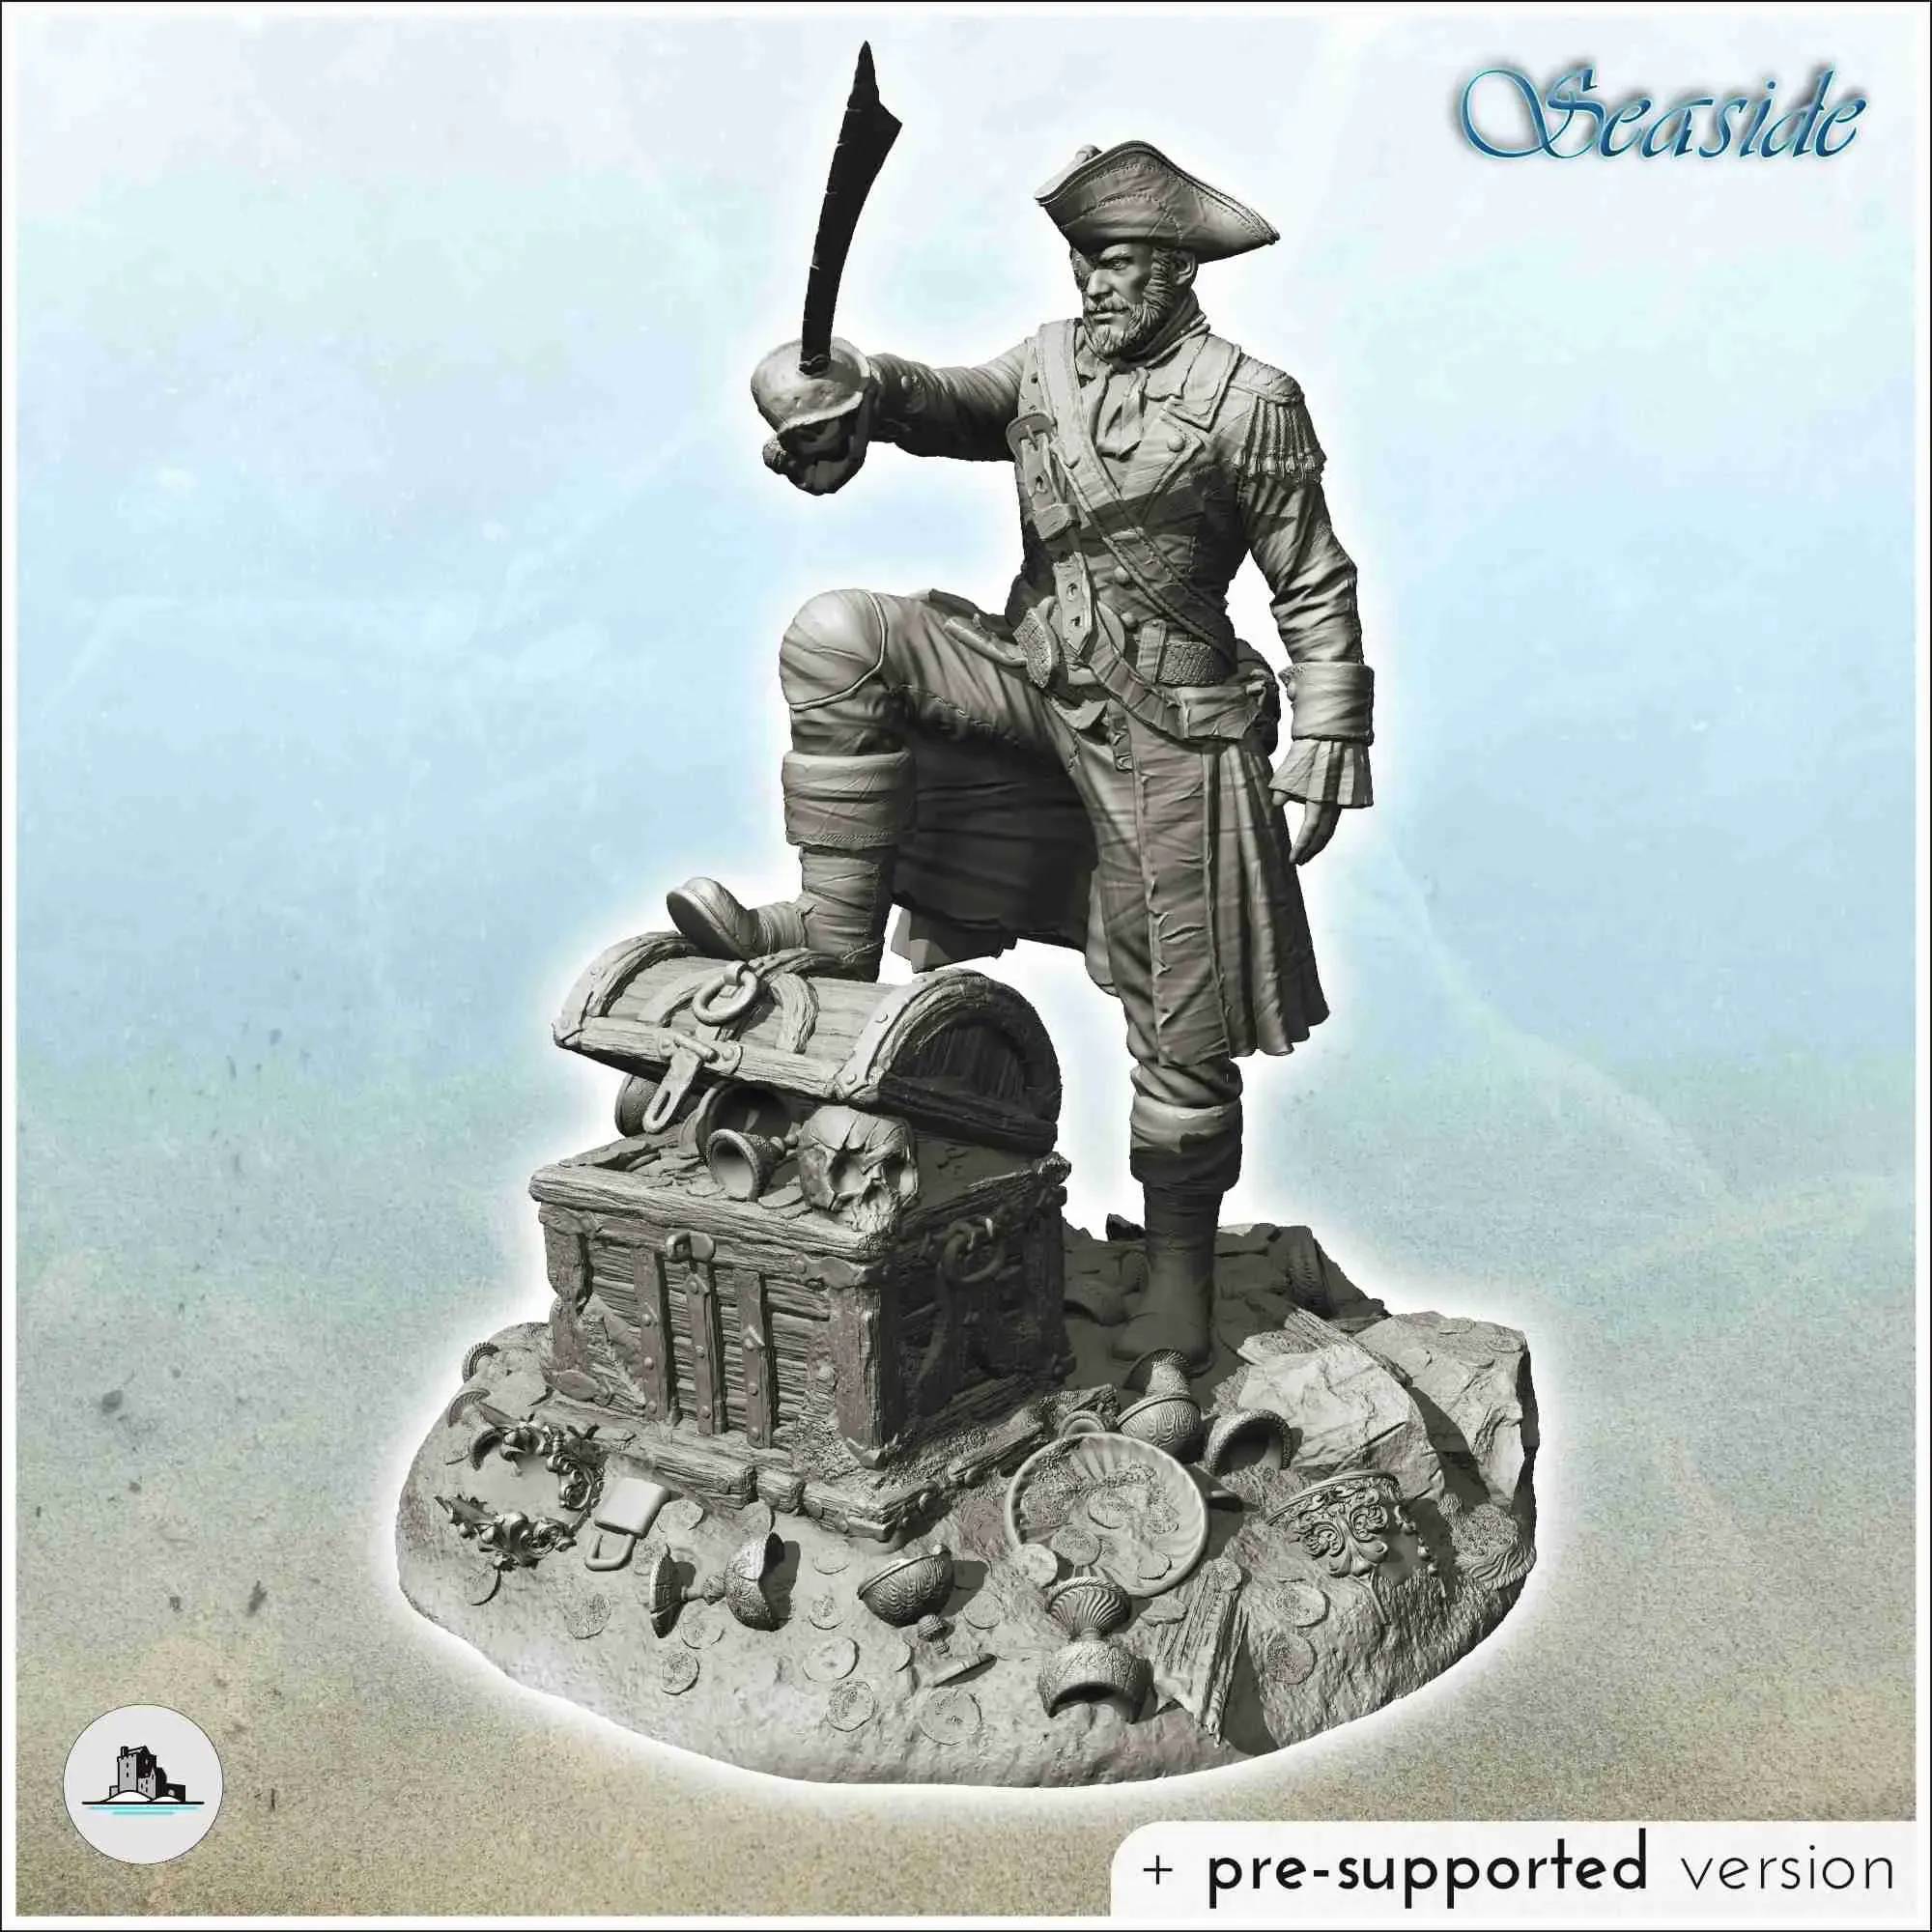 Pirate figures pack No. 1 - scenery medieval miniatures warh